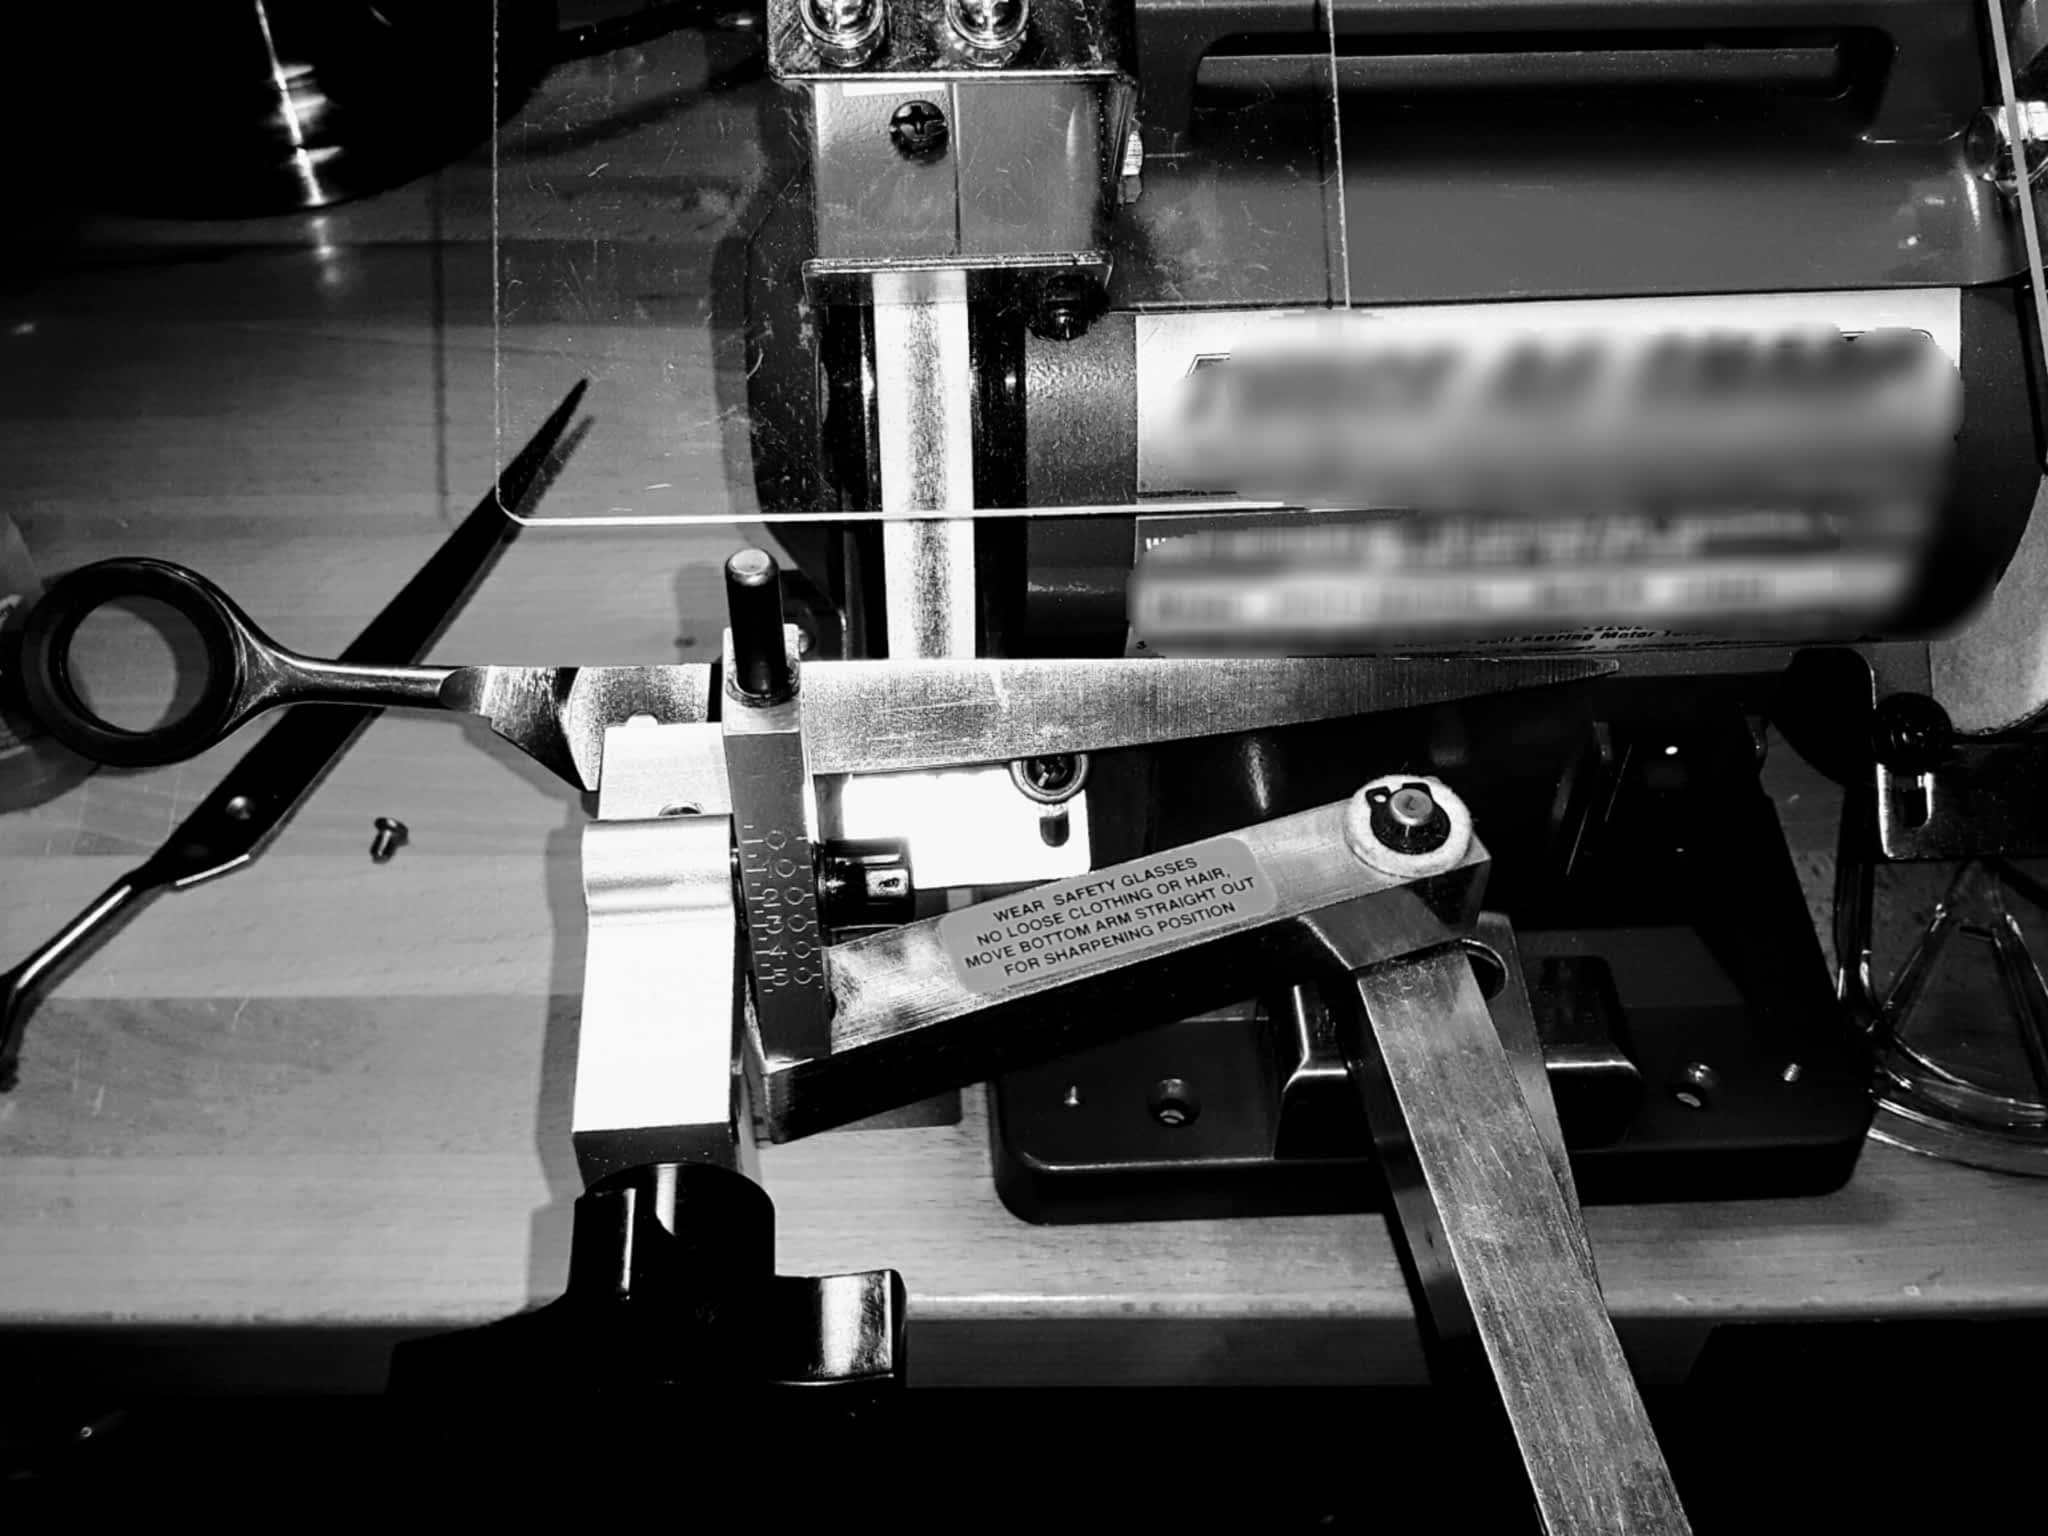 photo Vince's Sharpening